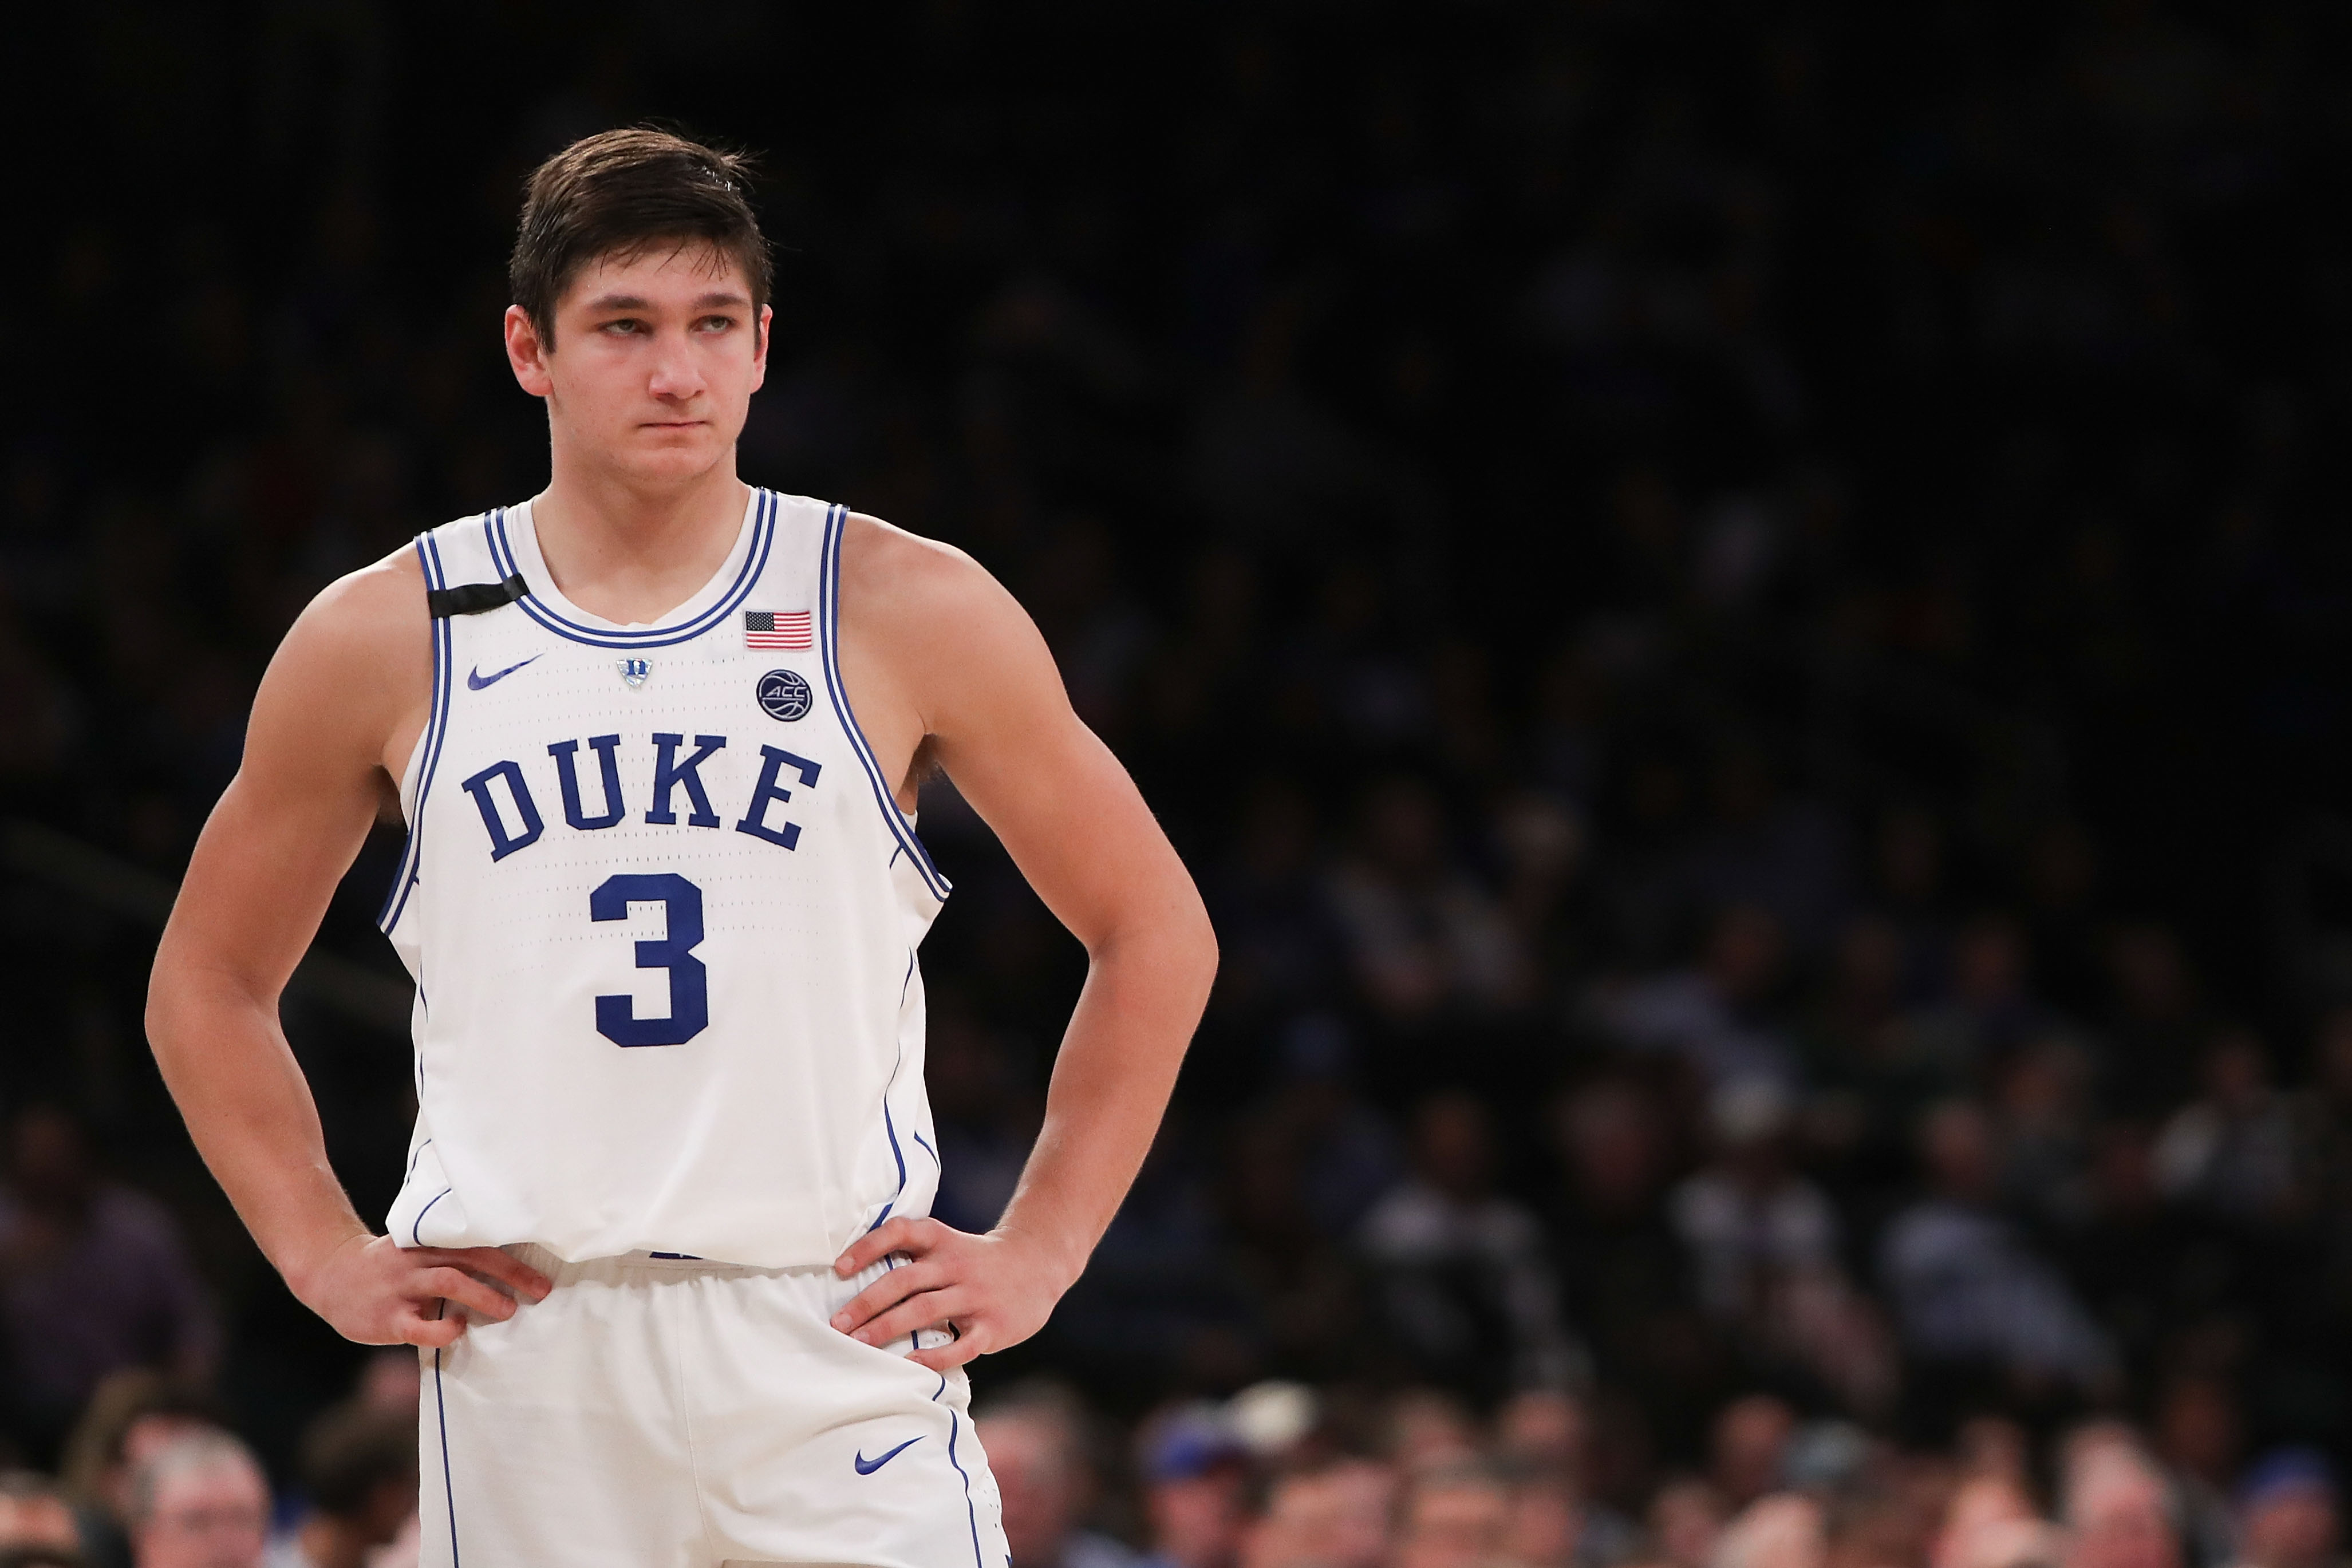 NEW YORK, NY - DECEMBER 06:  Grayson Allen #3 of the Duke Blue Devils looks on against the Florida Gators in the second half during the Jimmy V Classic at Madison Square Garden on December 6, 2016 in New York City.  (Photo by Michael Reaves/Getty Images)